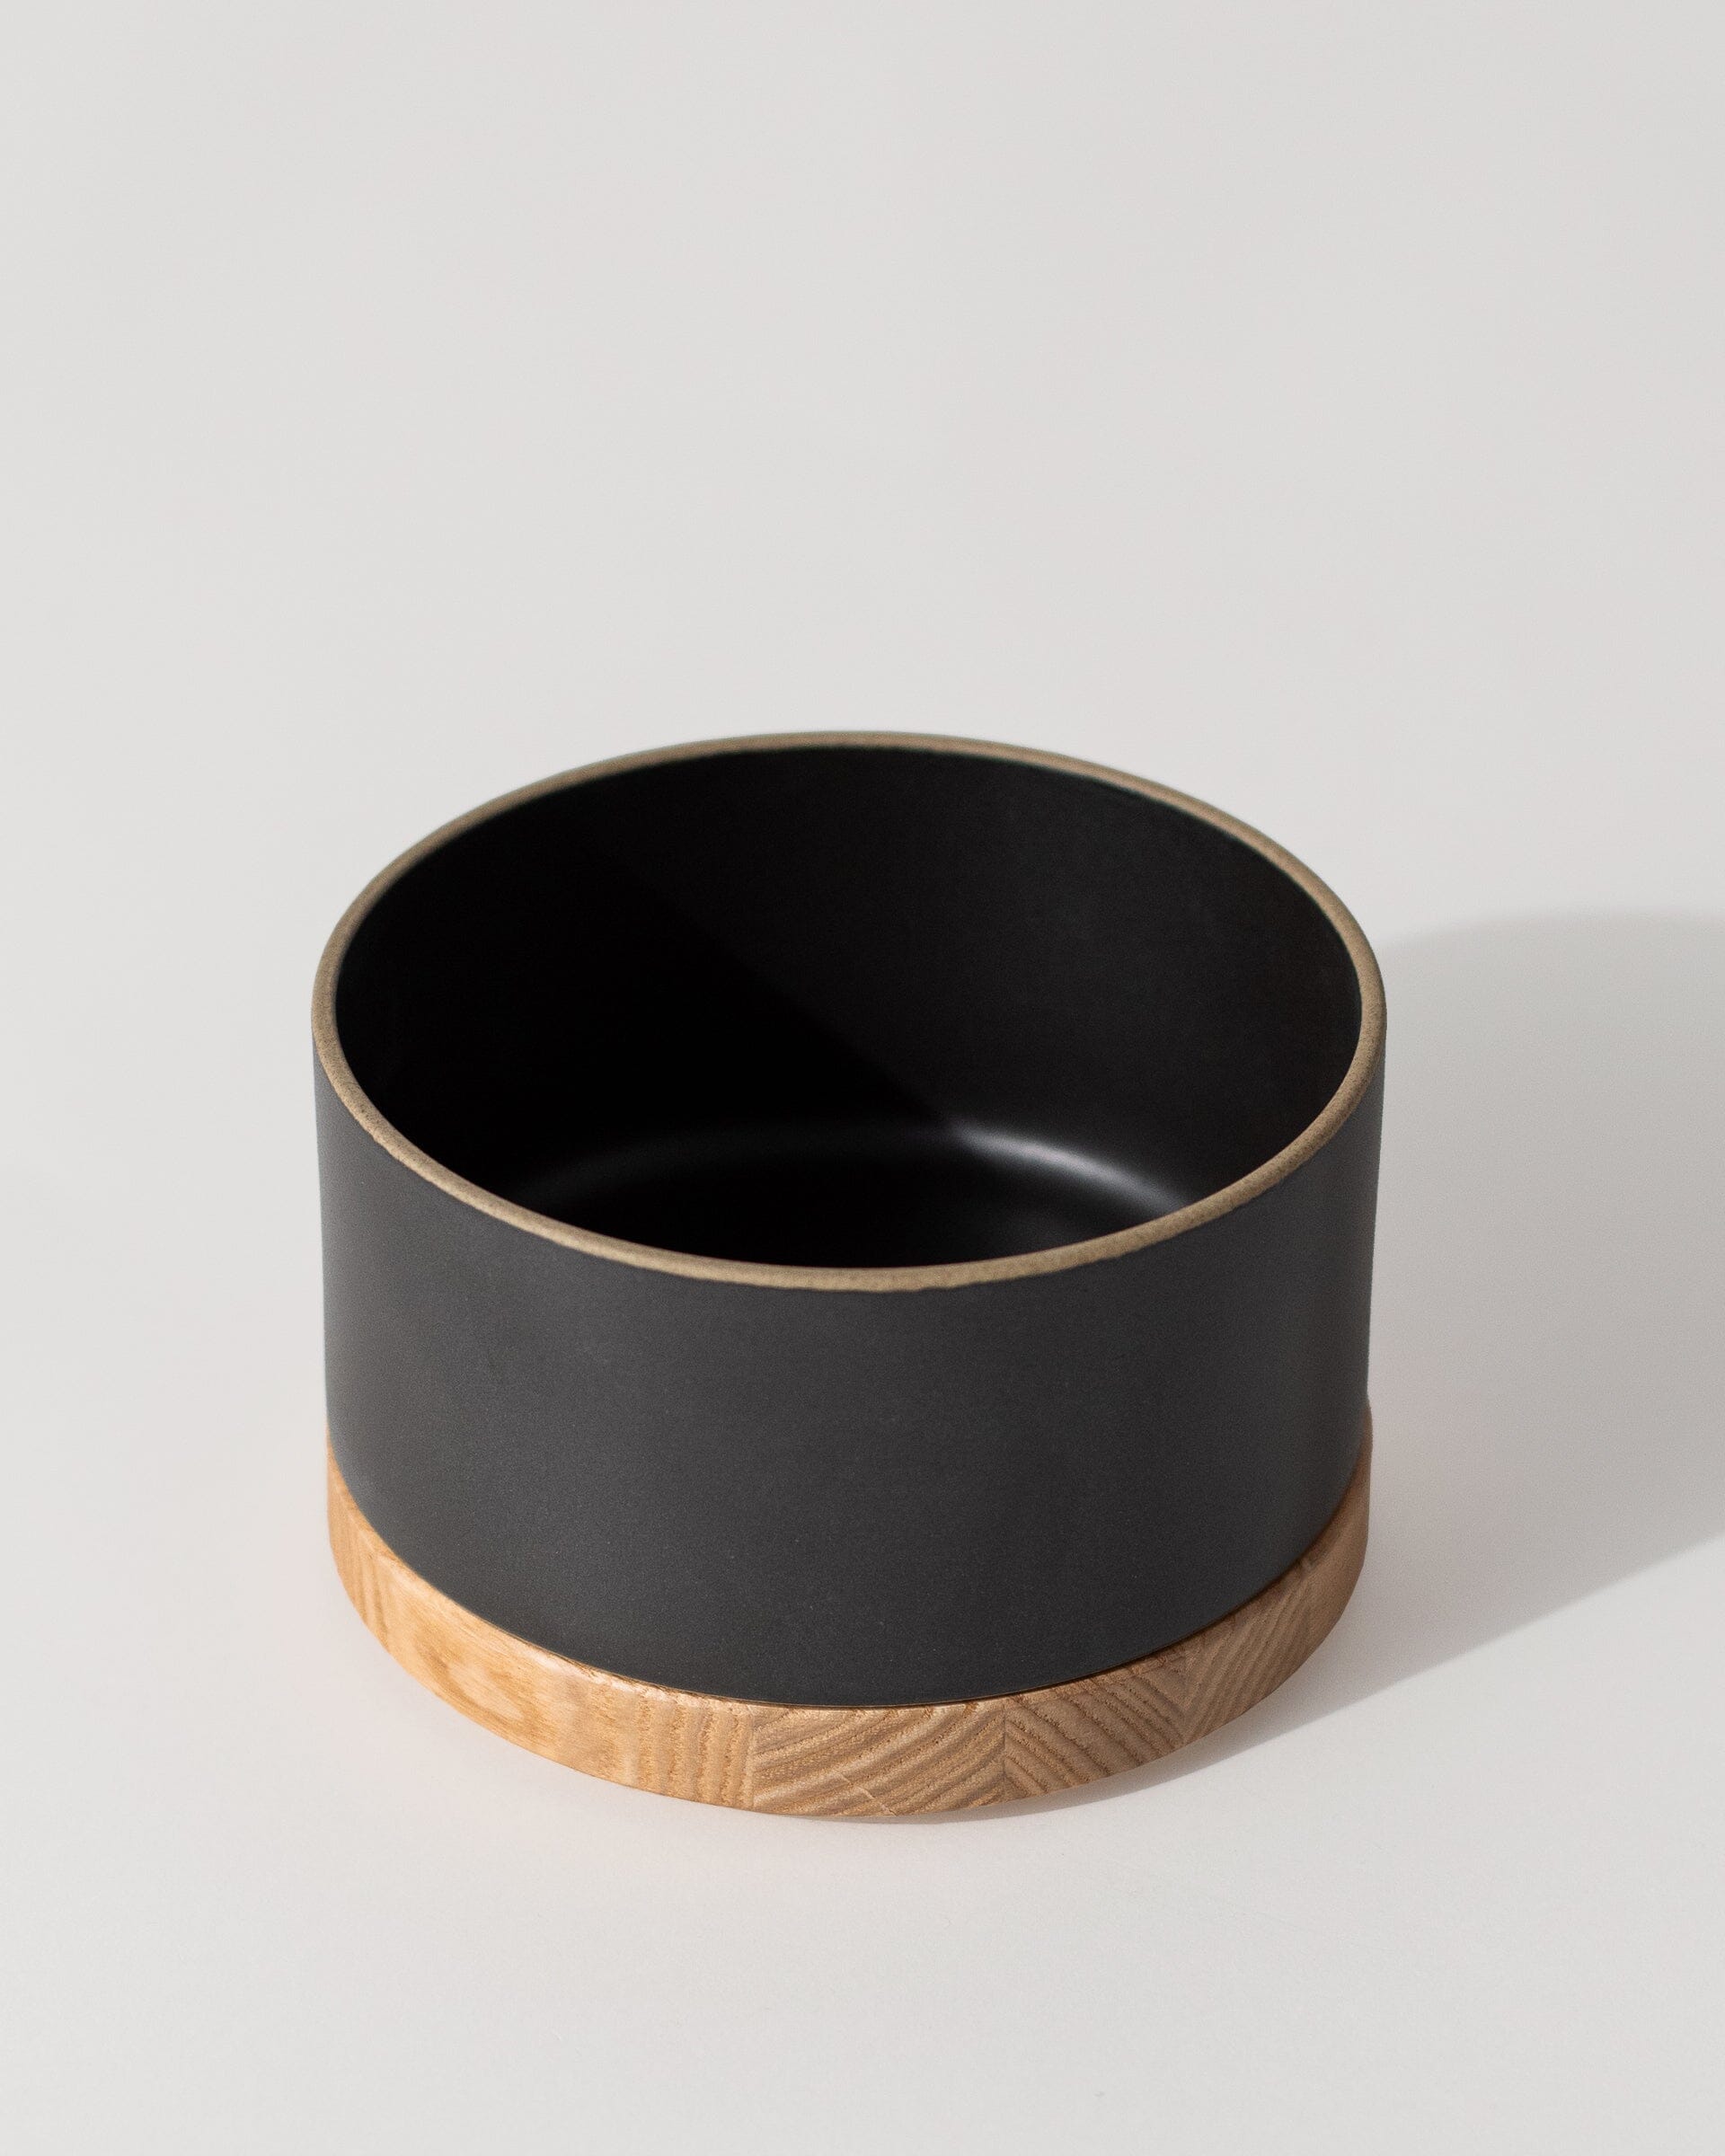 Hasami Porcelain Small Bowl in Black with small Ash Wooden Tray